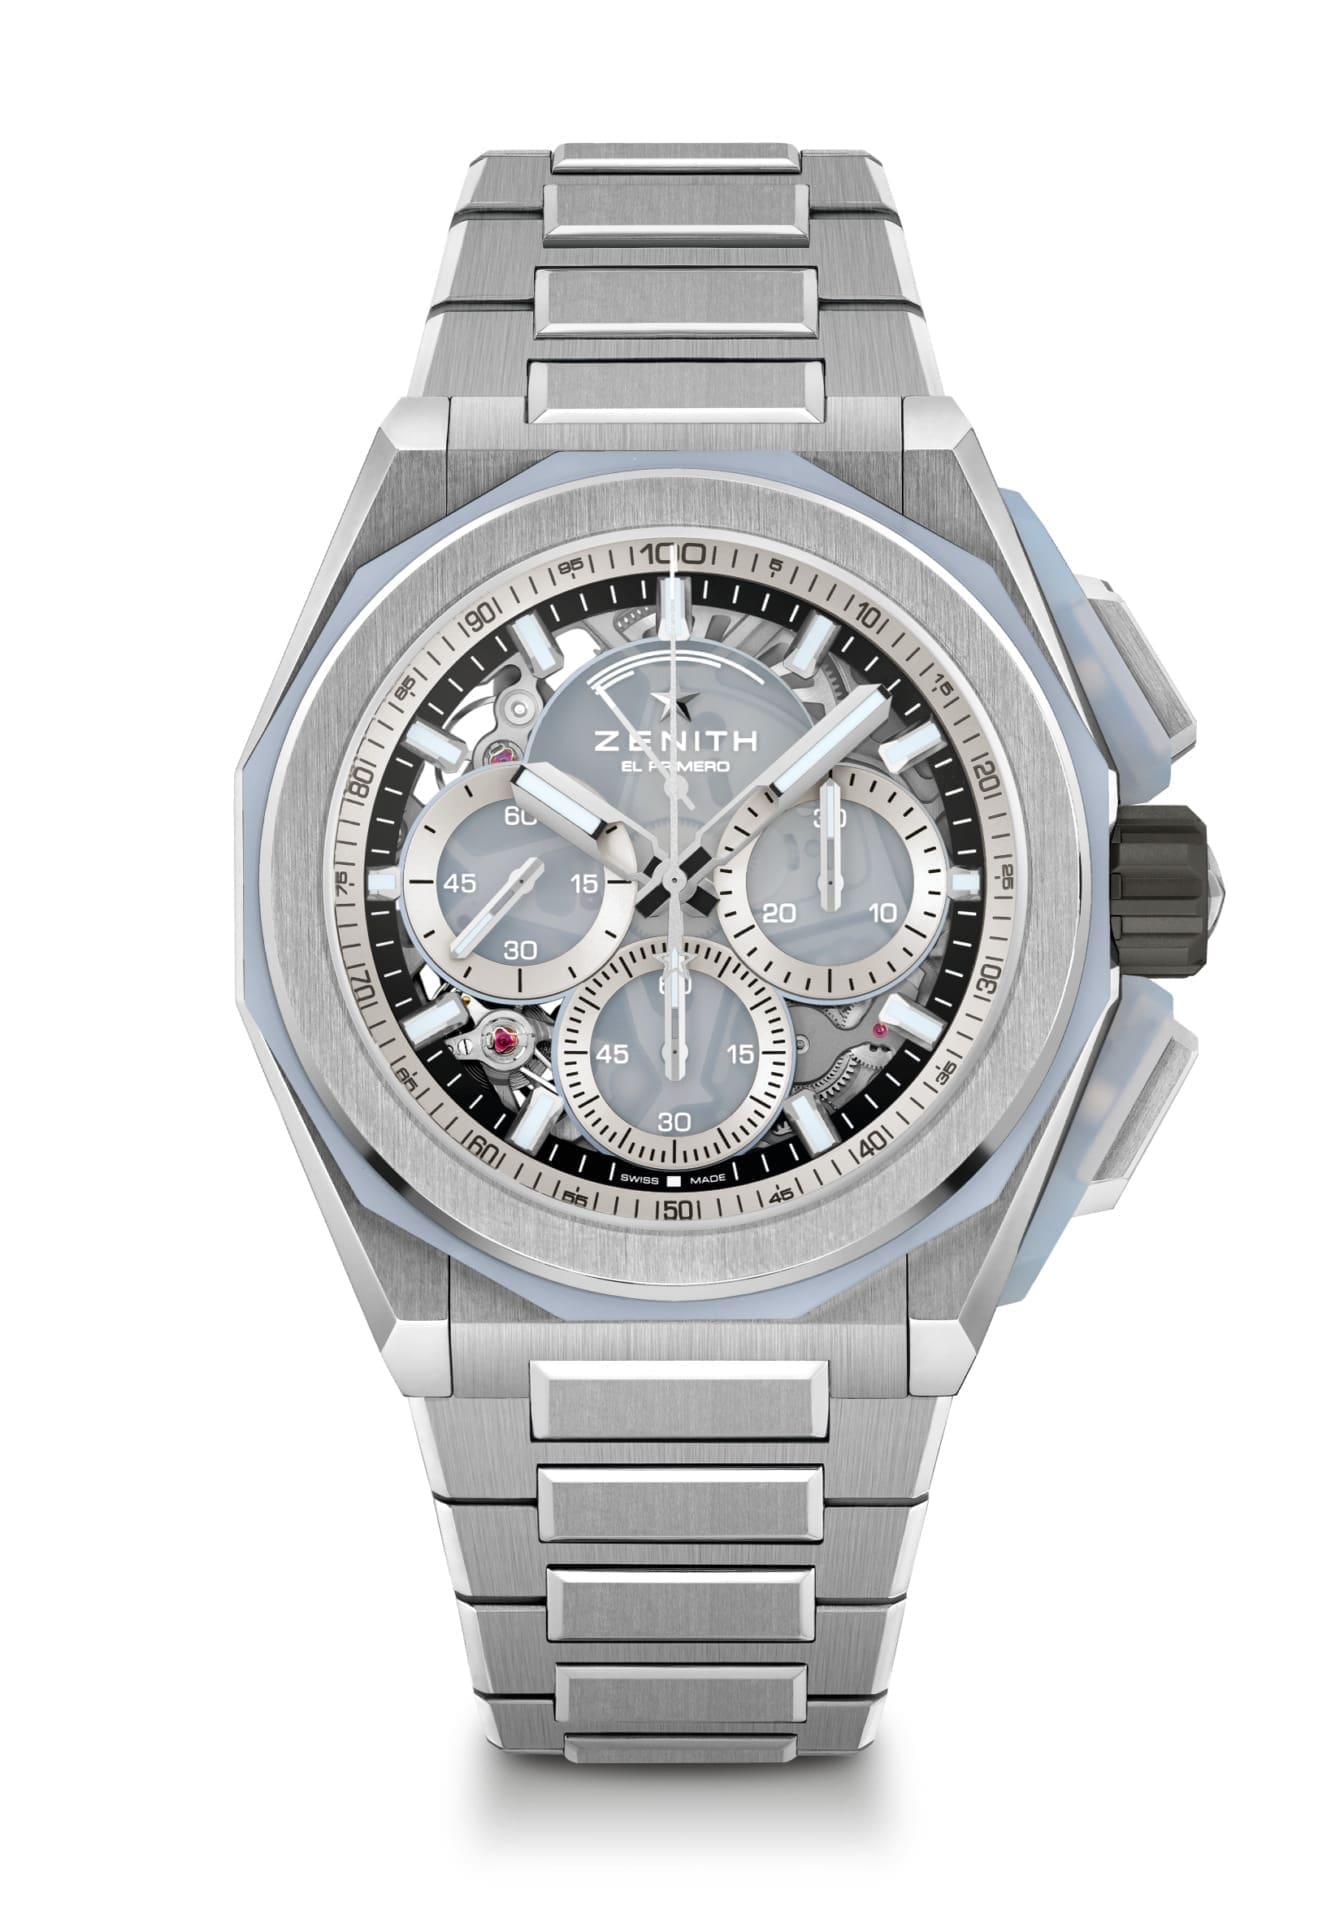 The Zenith Defy Extreme Glacier brings intrigue with a subtle pop